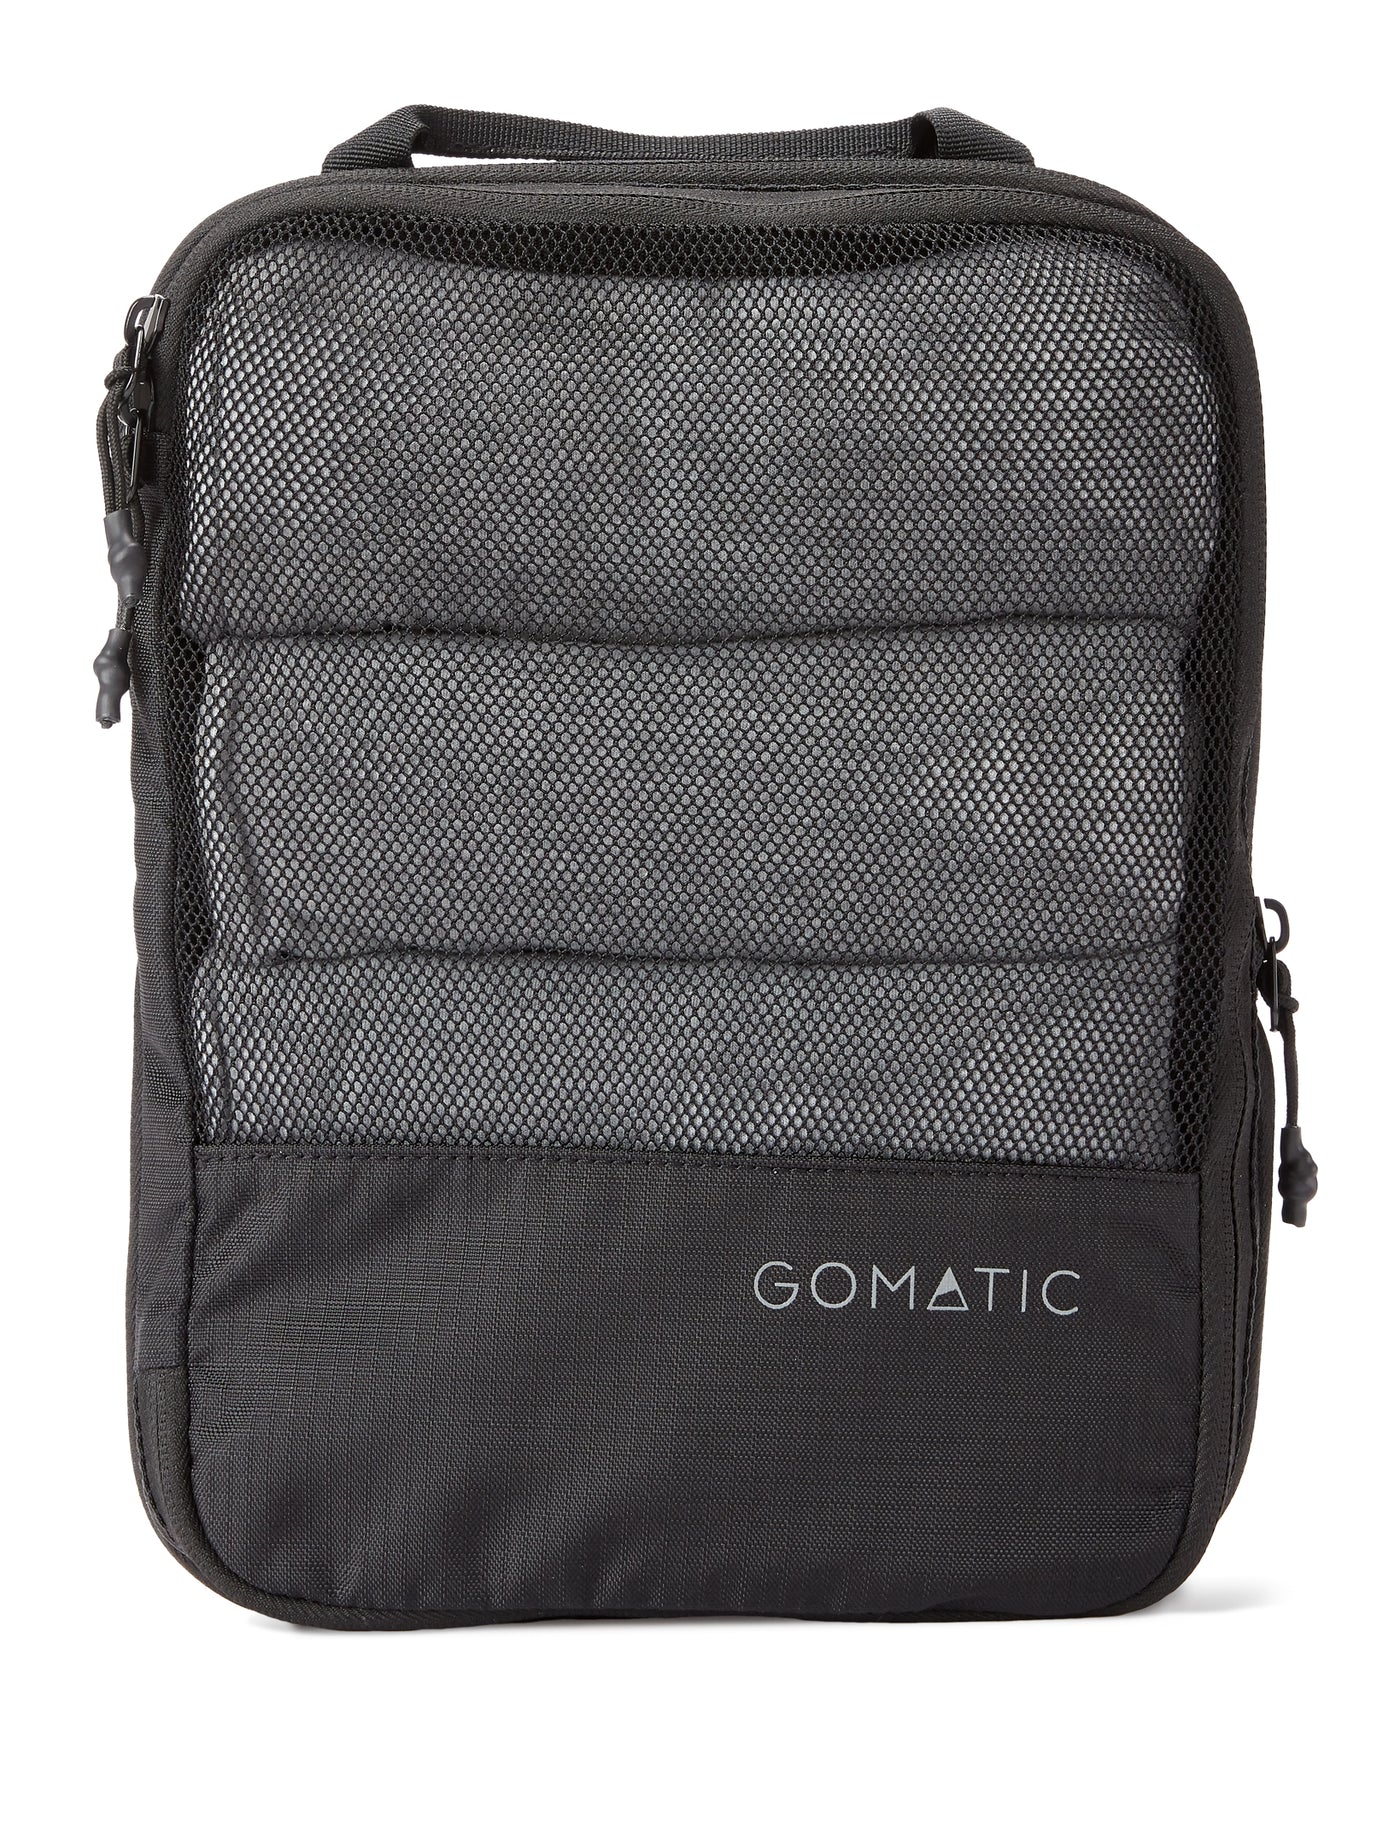 GOMATIC Compression Packing Cube